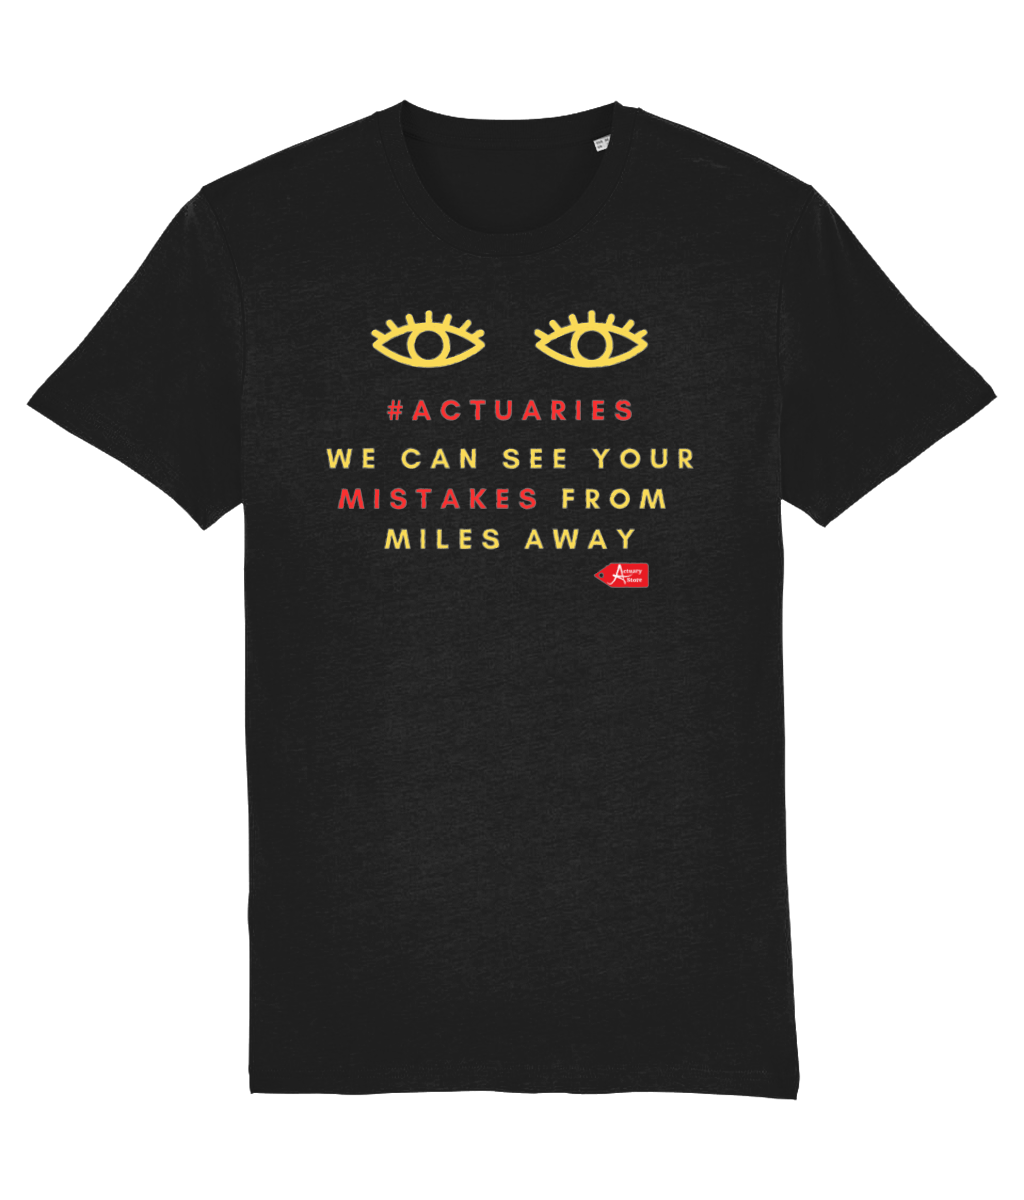 Actuaries We Can See Your Mistakes From Miles Away Black T-Shirt